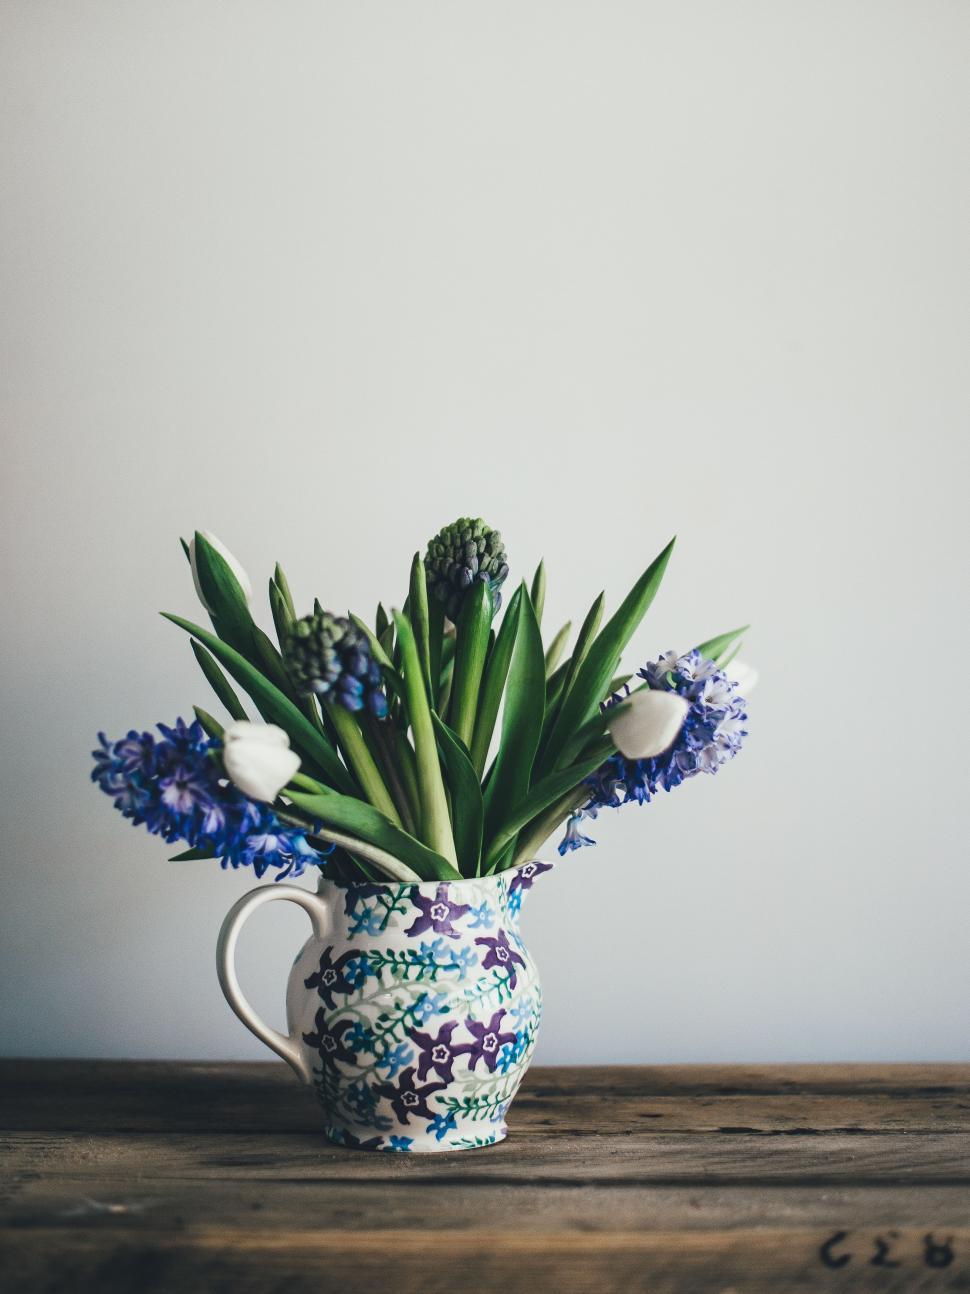 Free Image of Blue and White Vase With Flowers 